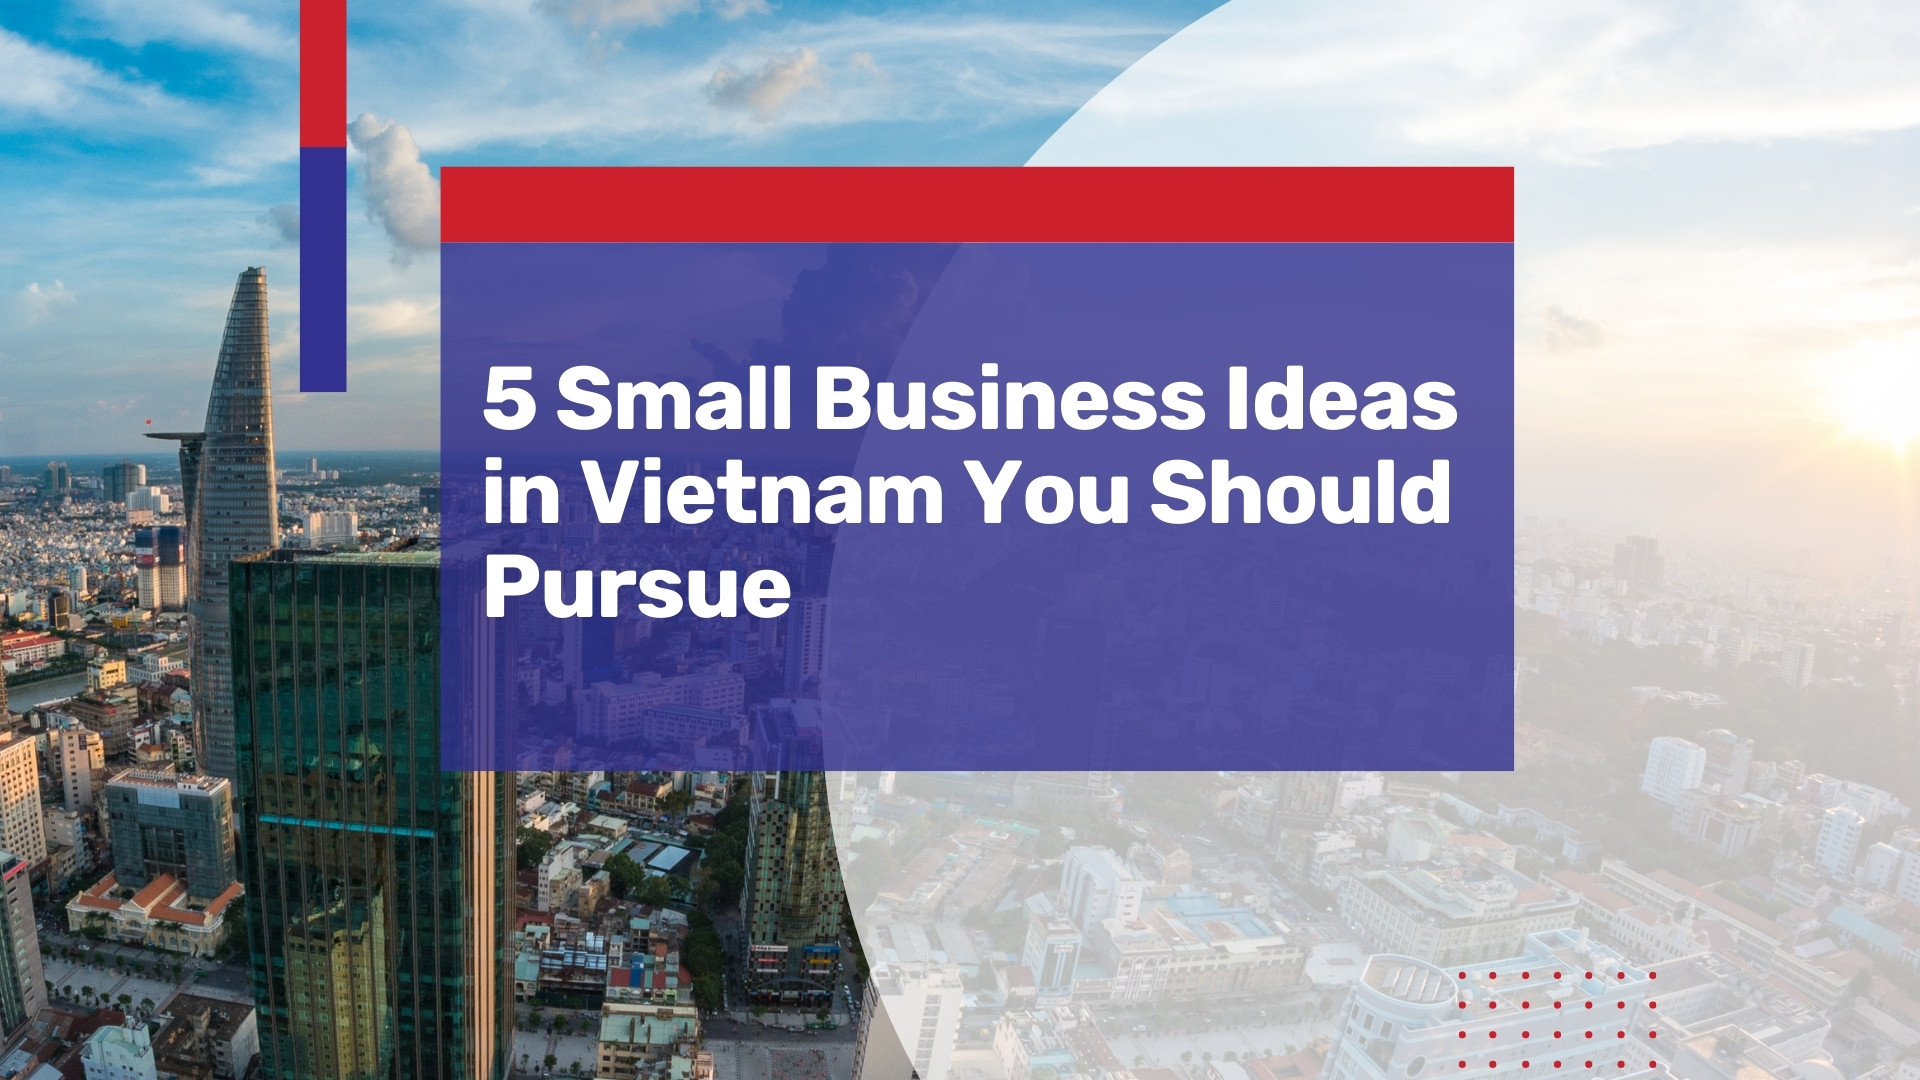 Small Business Ideas in Vietnam You Should Pursue